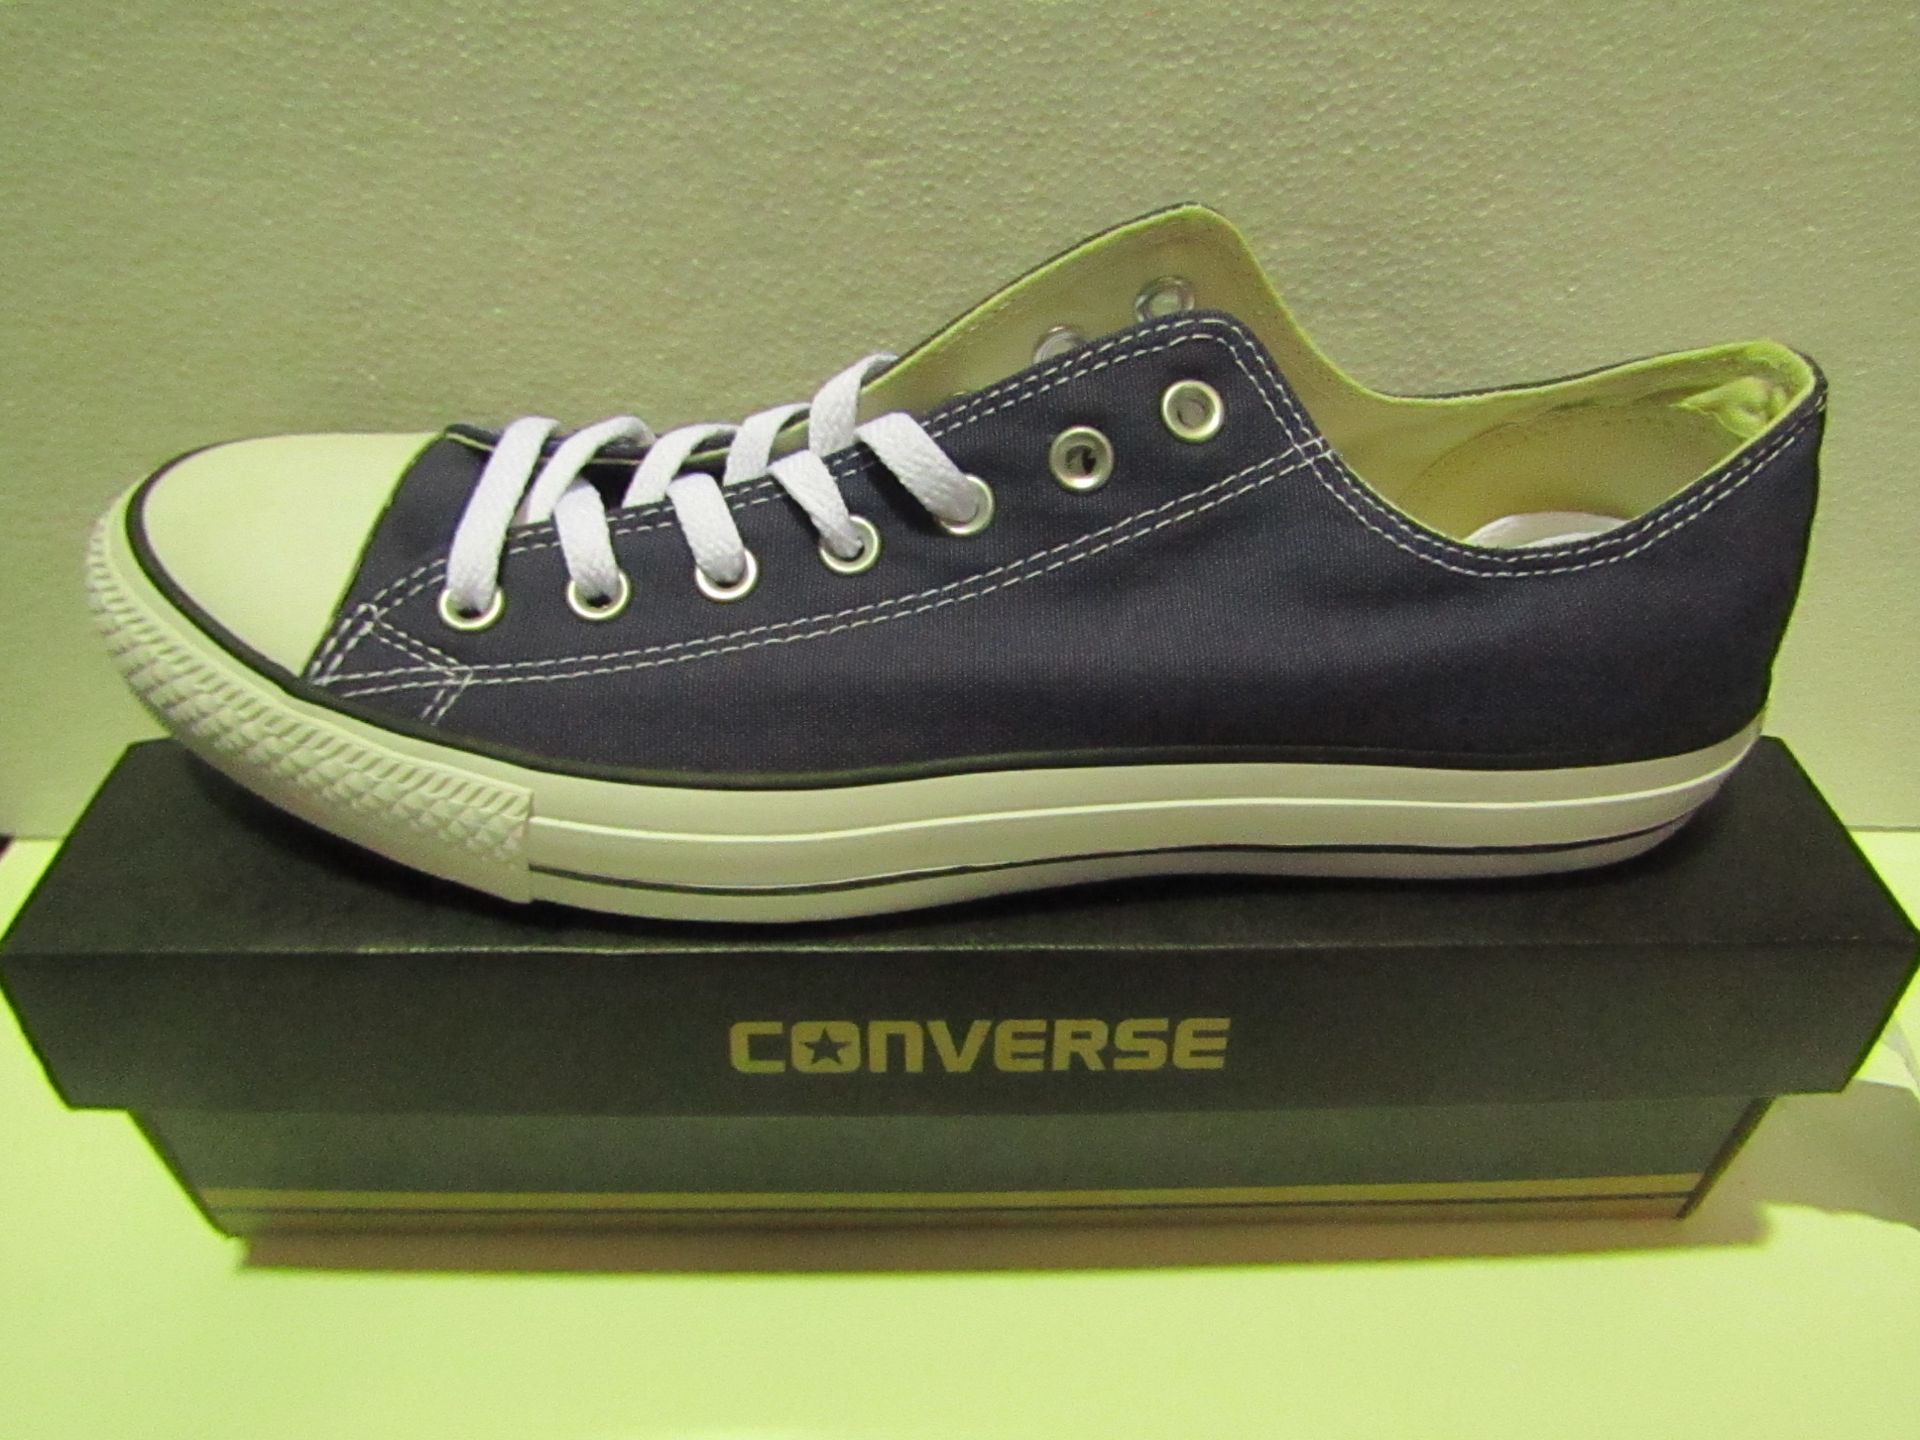 Converse All Star Navy Canvas Trainer size UK 12 new & boxed see image for design